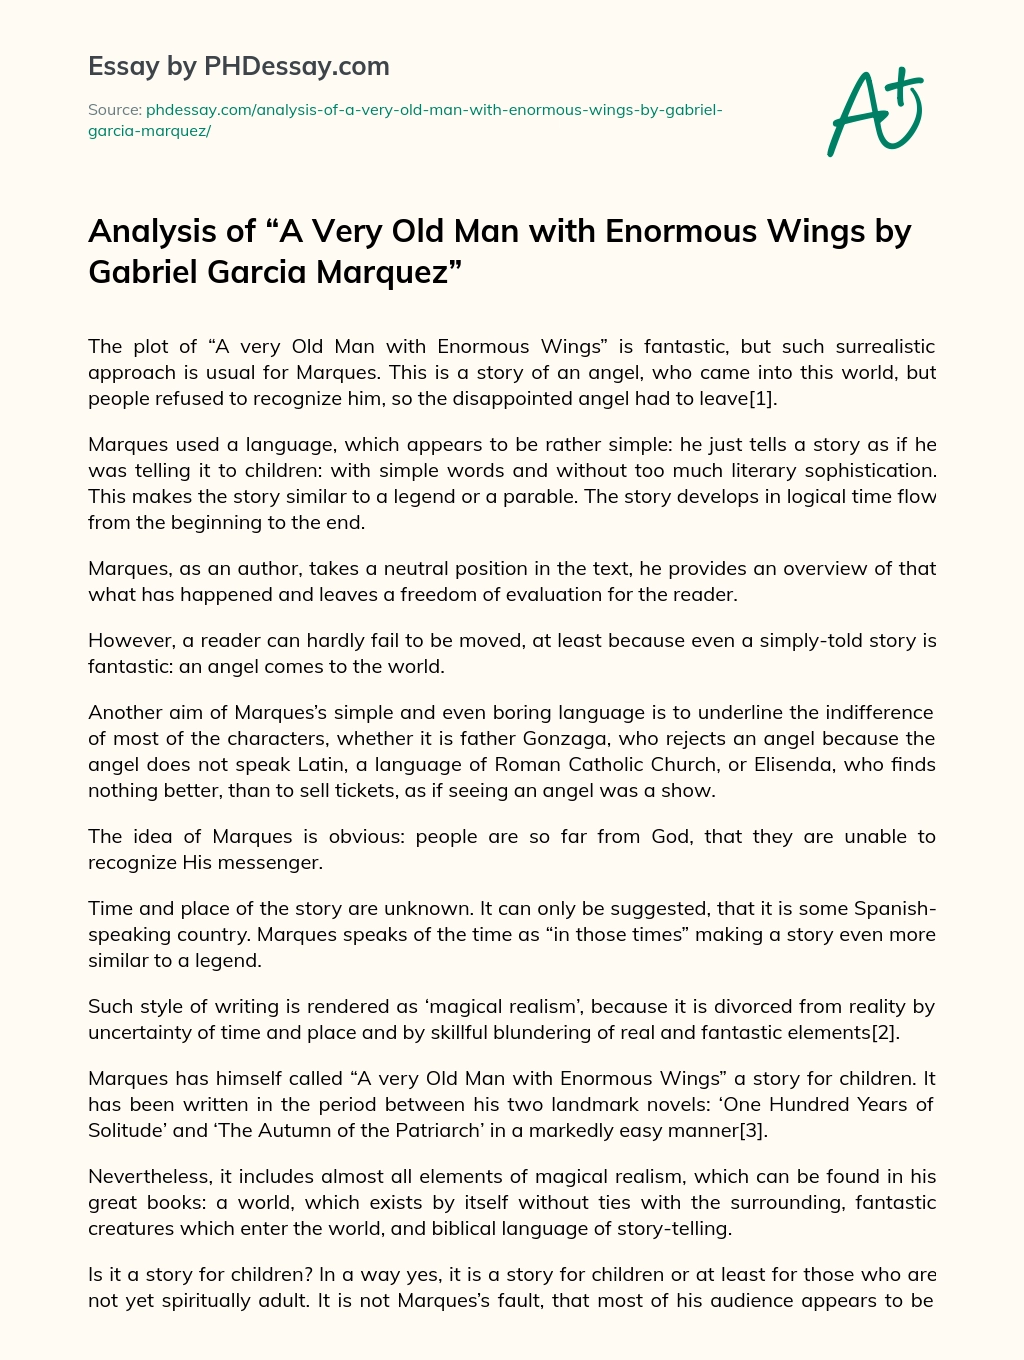 a very old man with enormous wings thesis statement